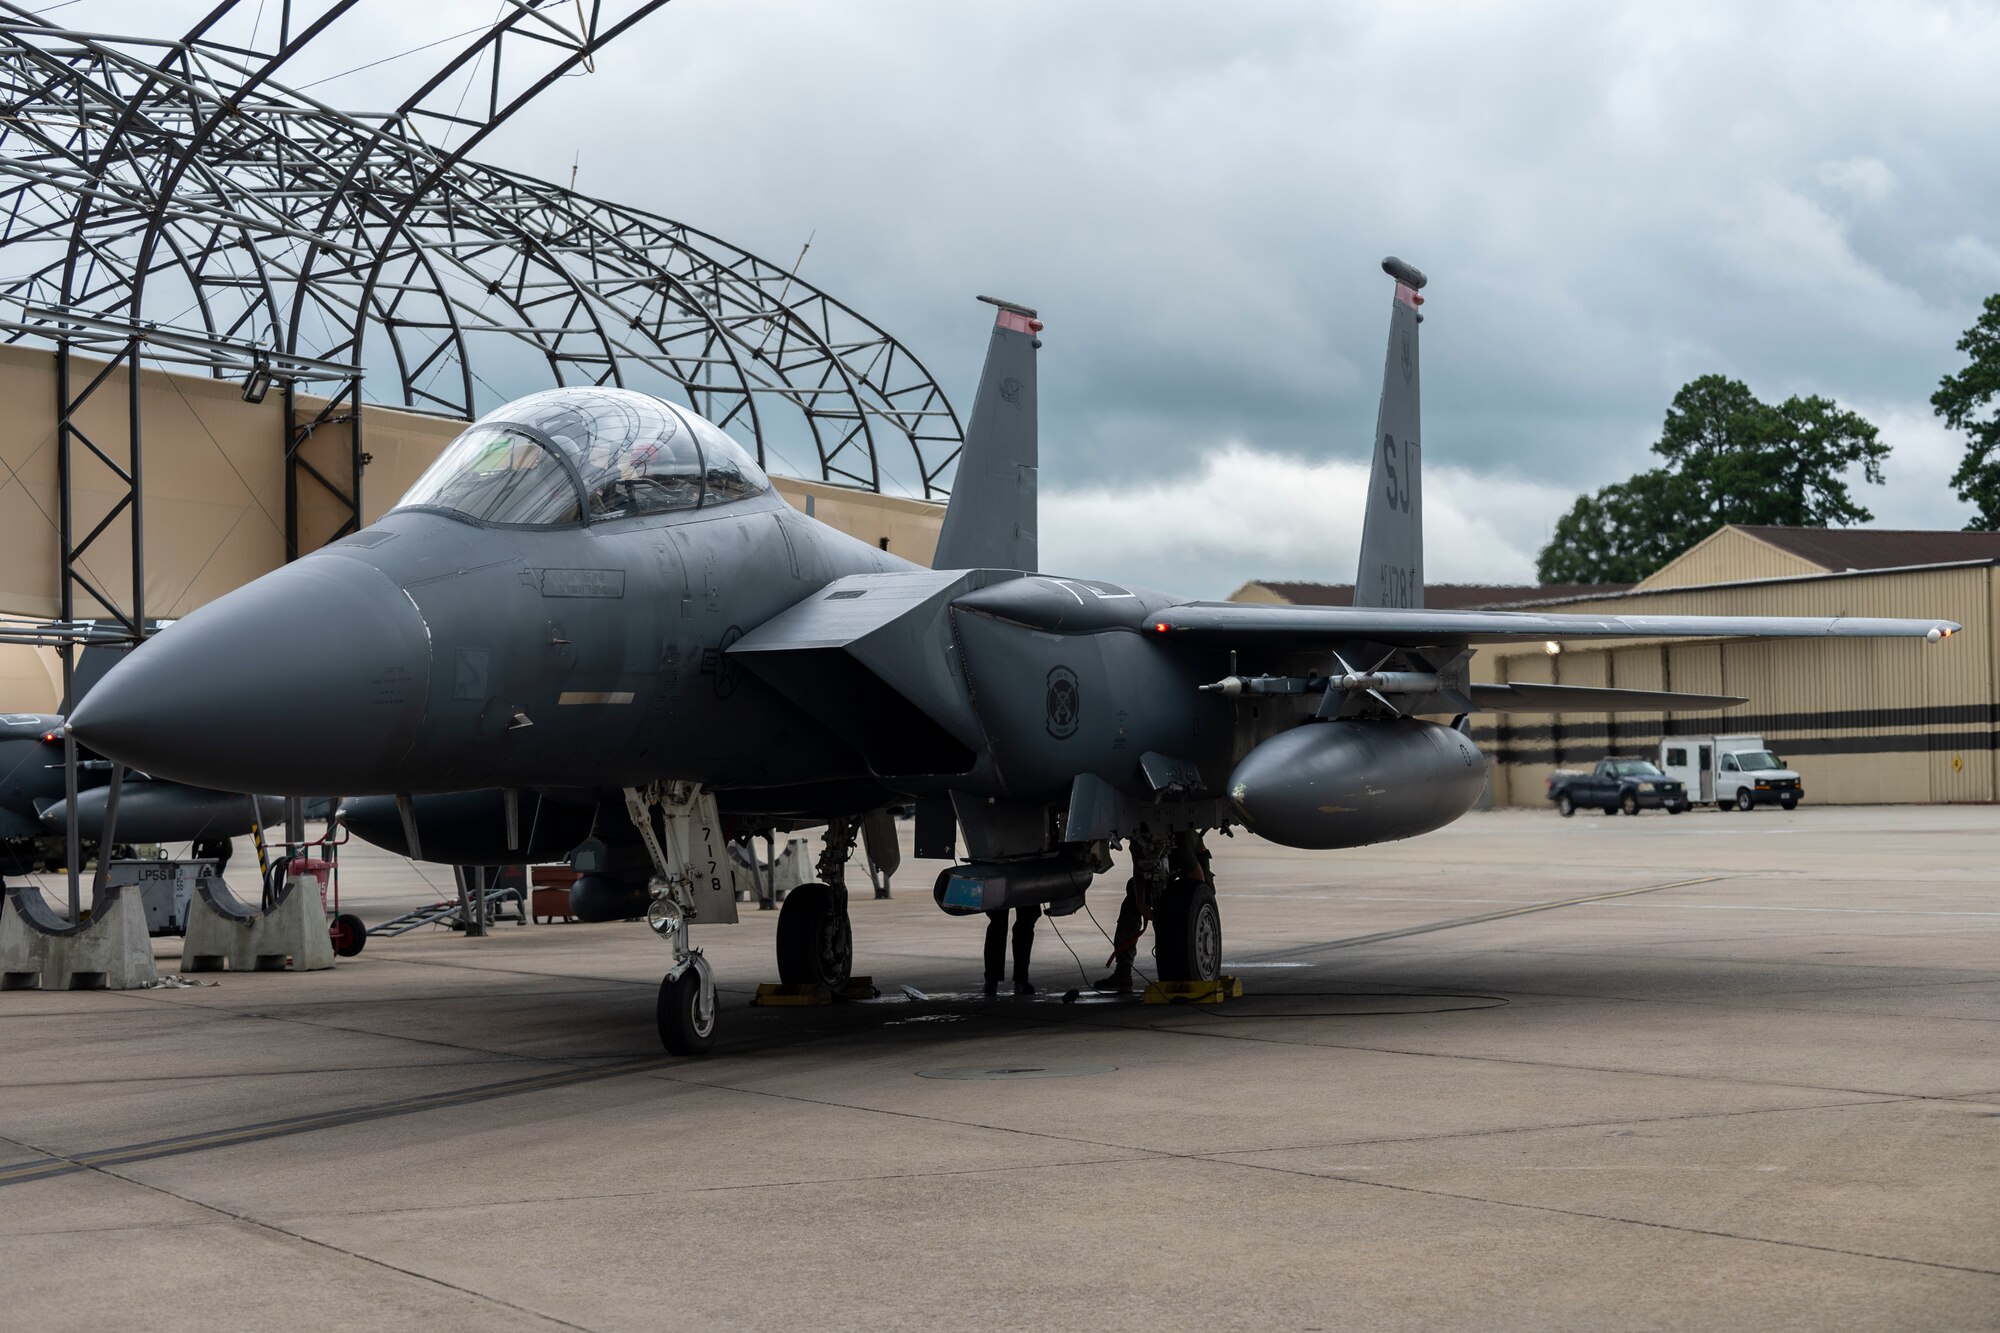 Aircrew members and maintainers from the 333rd Fighter Squadron perform a pre-flight check on an F-15E Strike Eagle at Seymour Johnson Air Force Base, North Carolina, August 4, 2021.